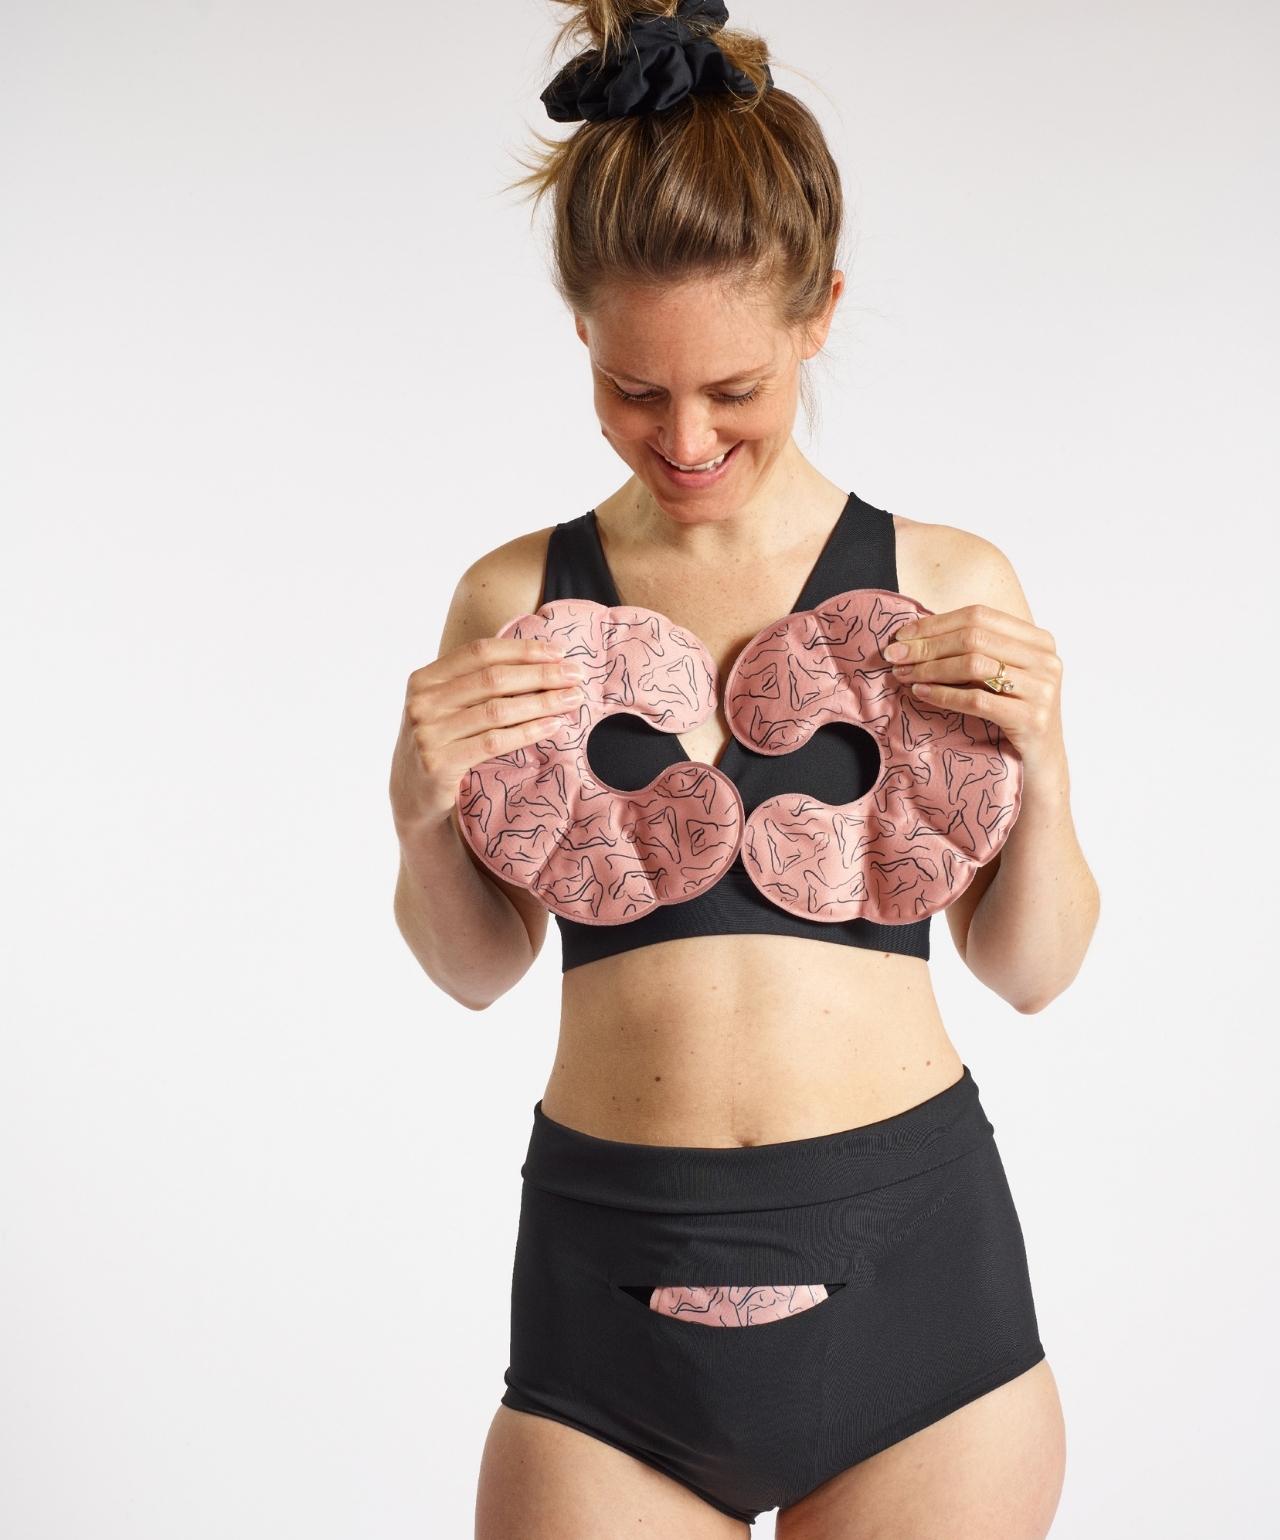 Woman wearing Nyssa postpartum bralette and underwear, holding reusable breast and chest ice-heat packs.